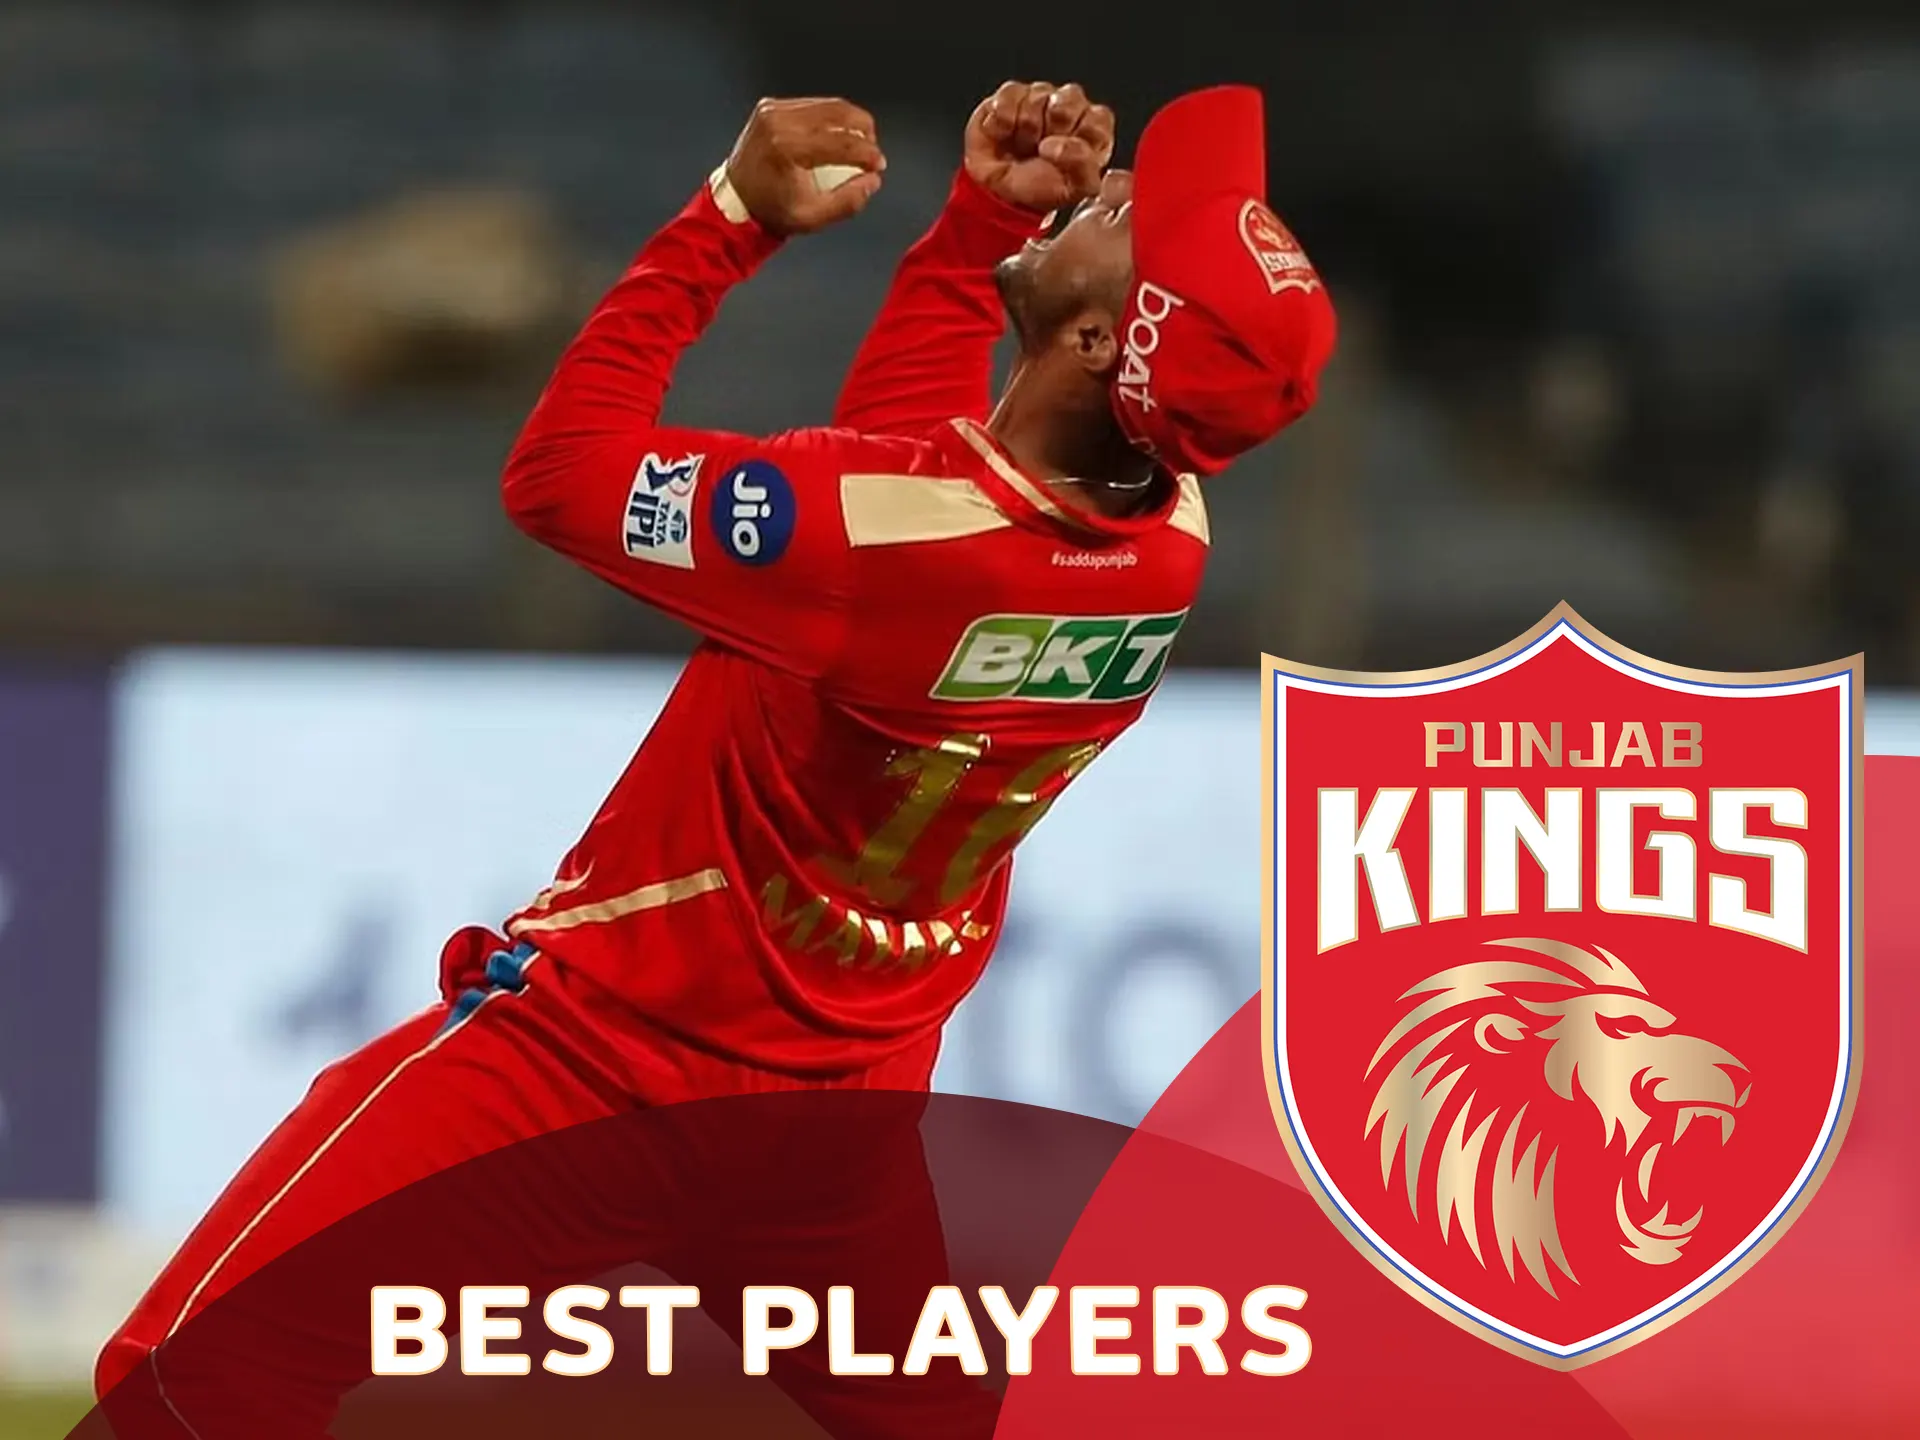 Learn more about Punjab Kings best players.